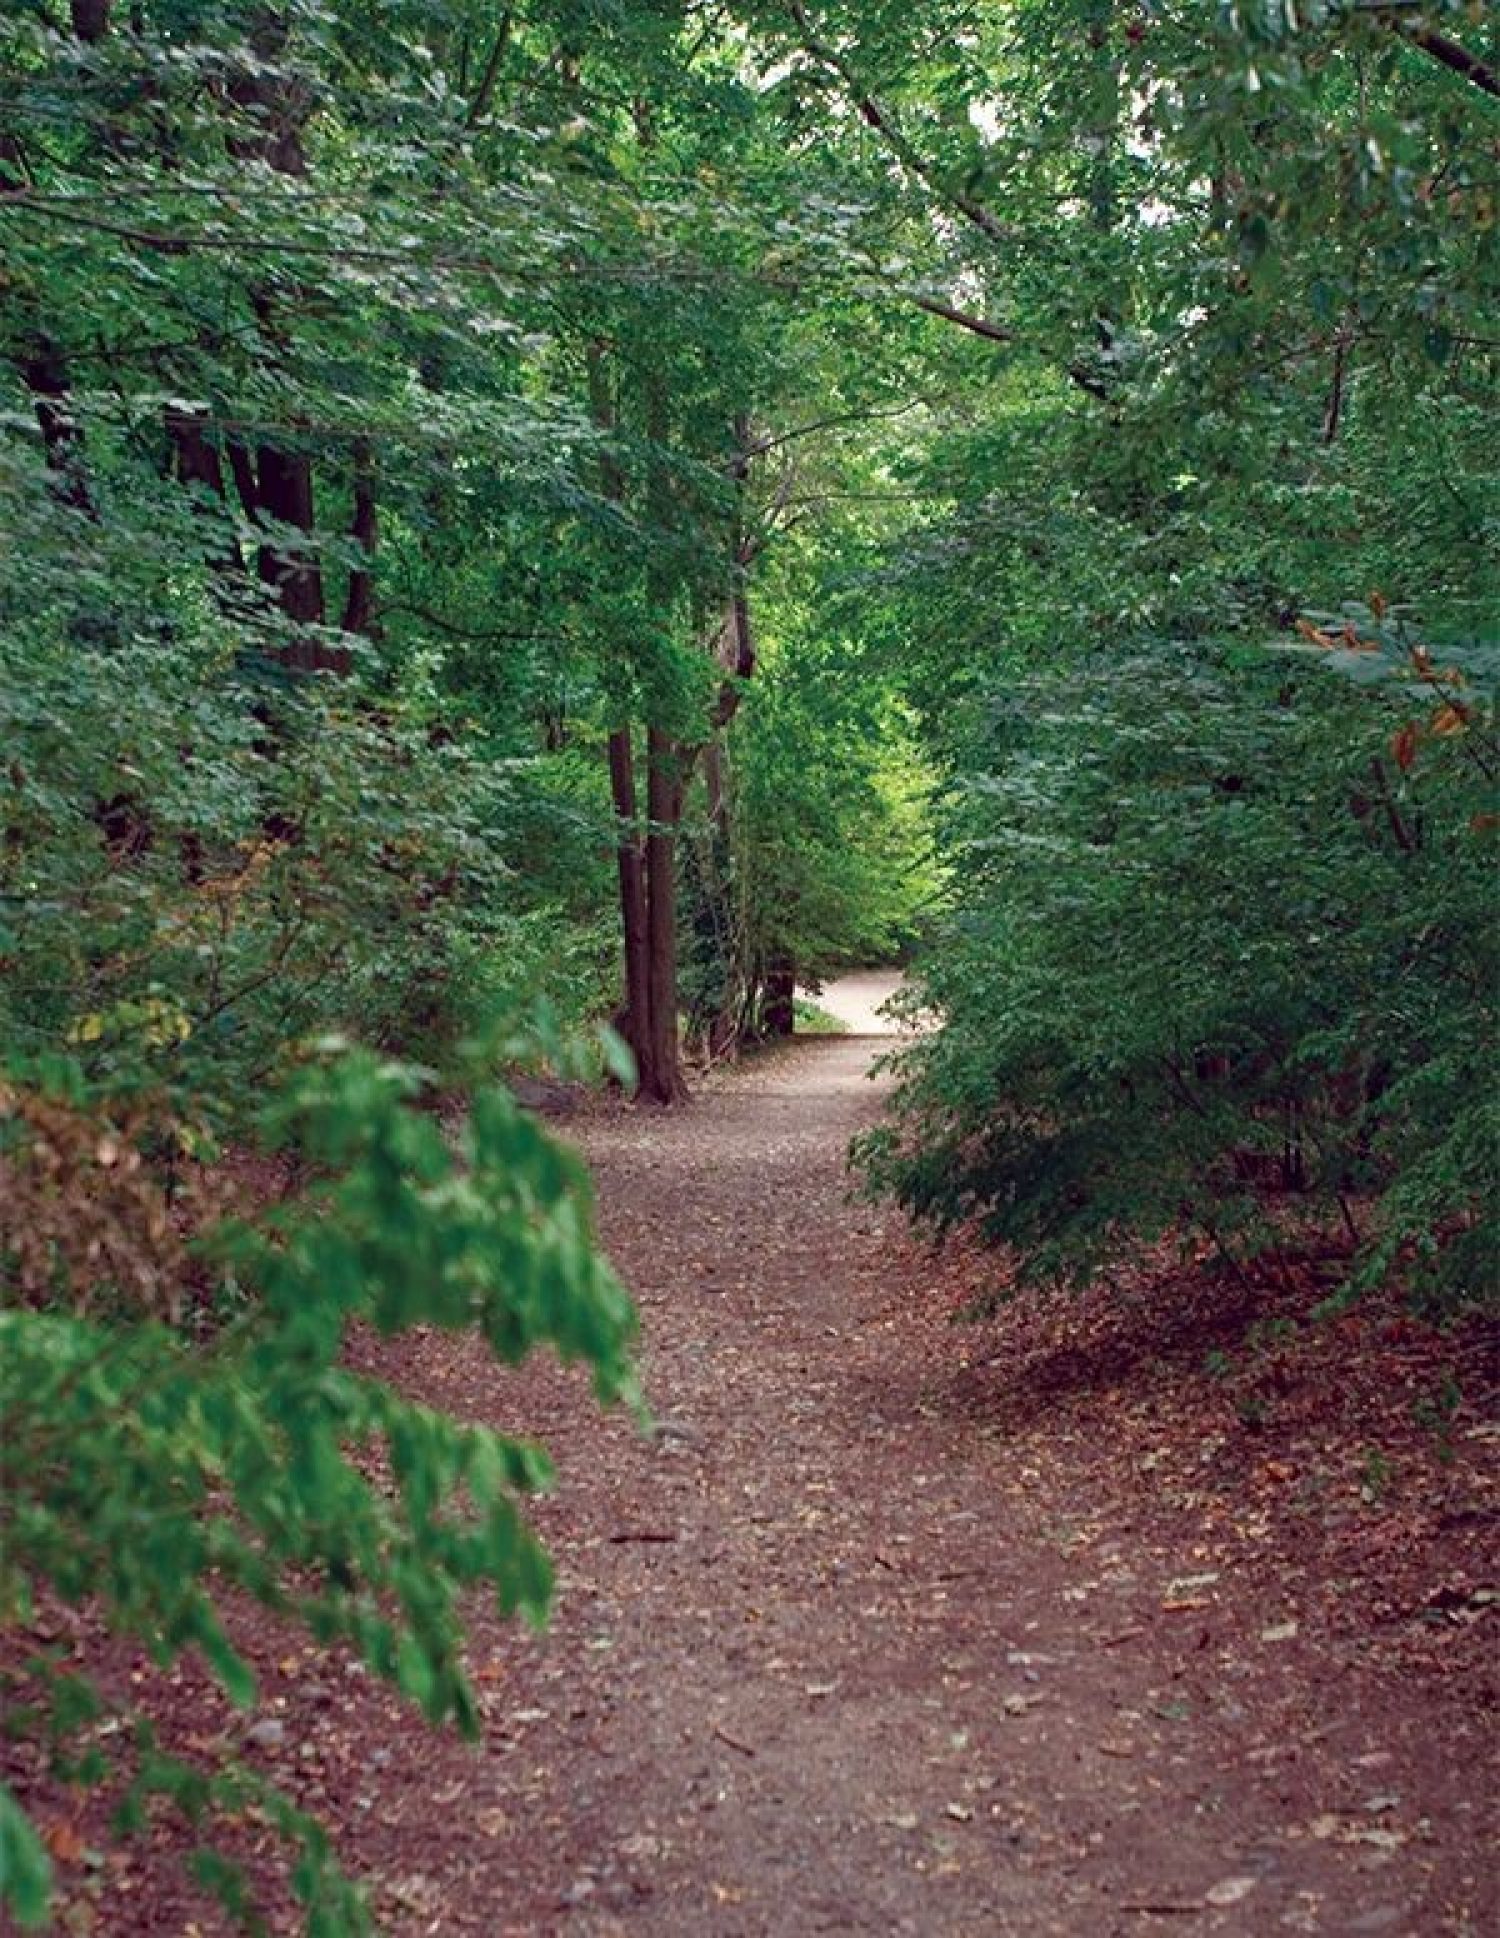 A trail through the forest